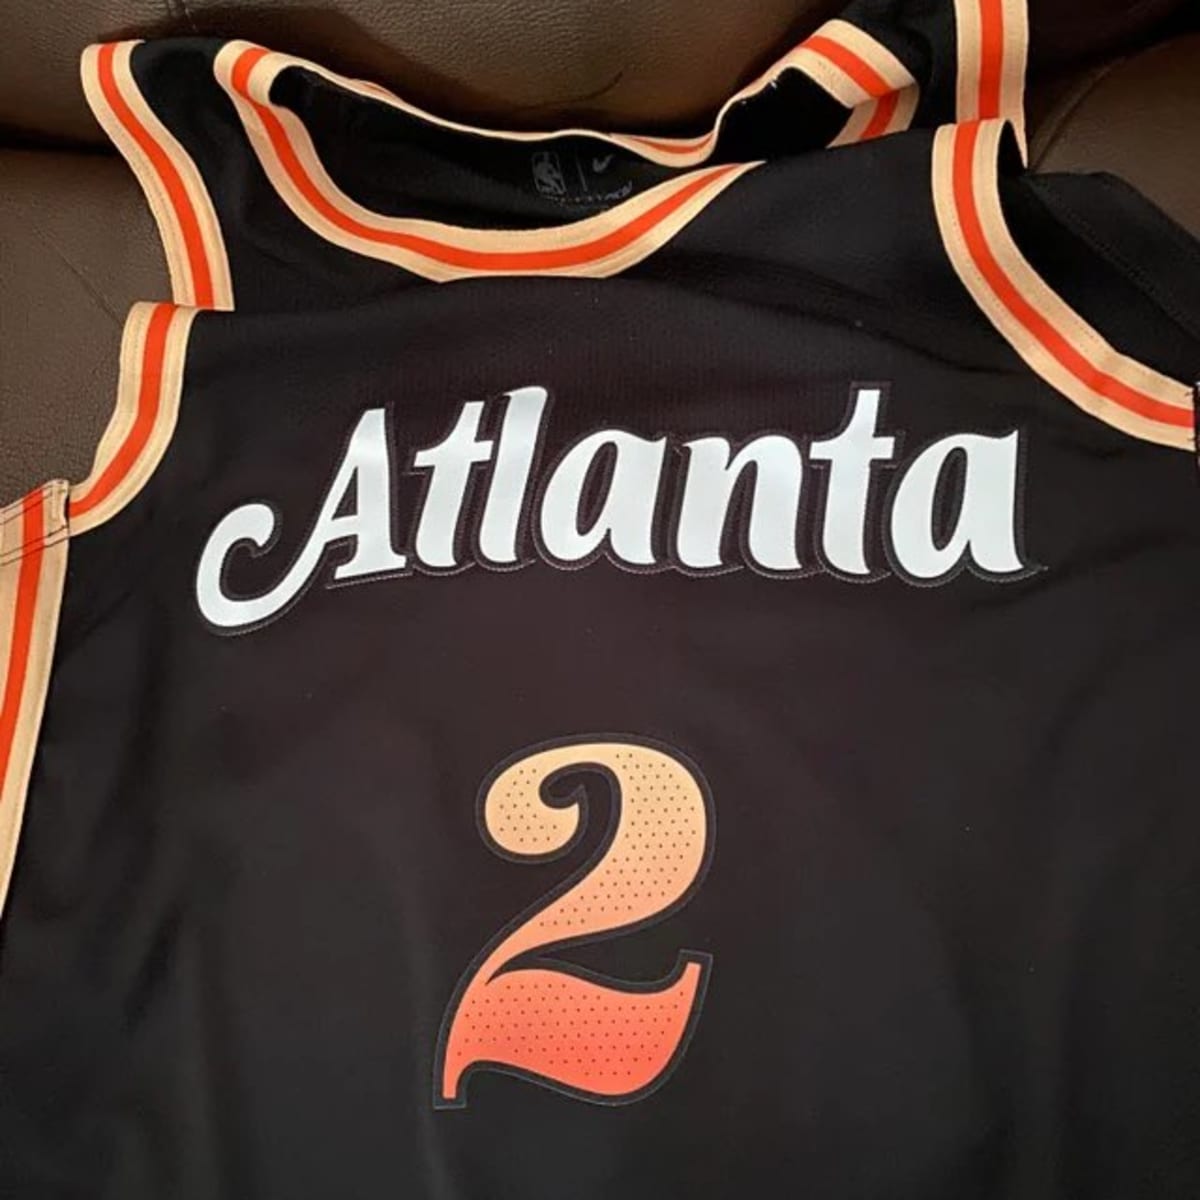 Hawks current player jersey